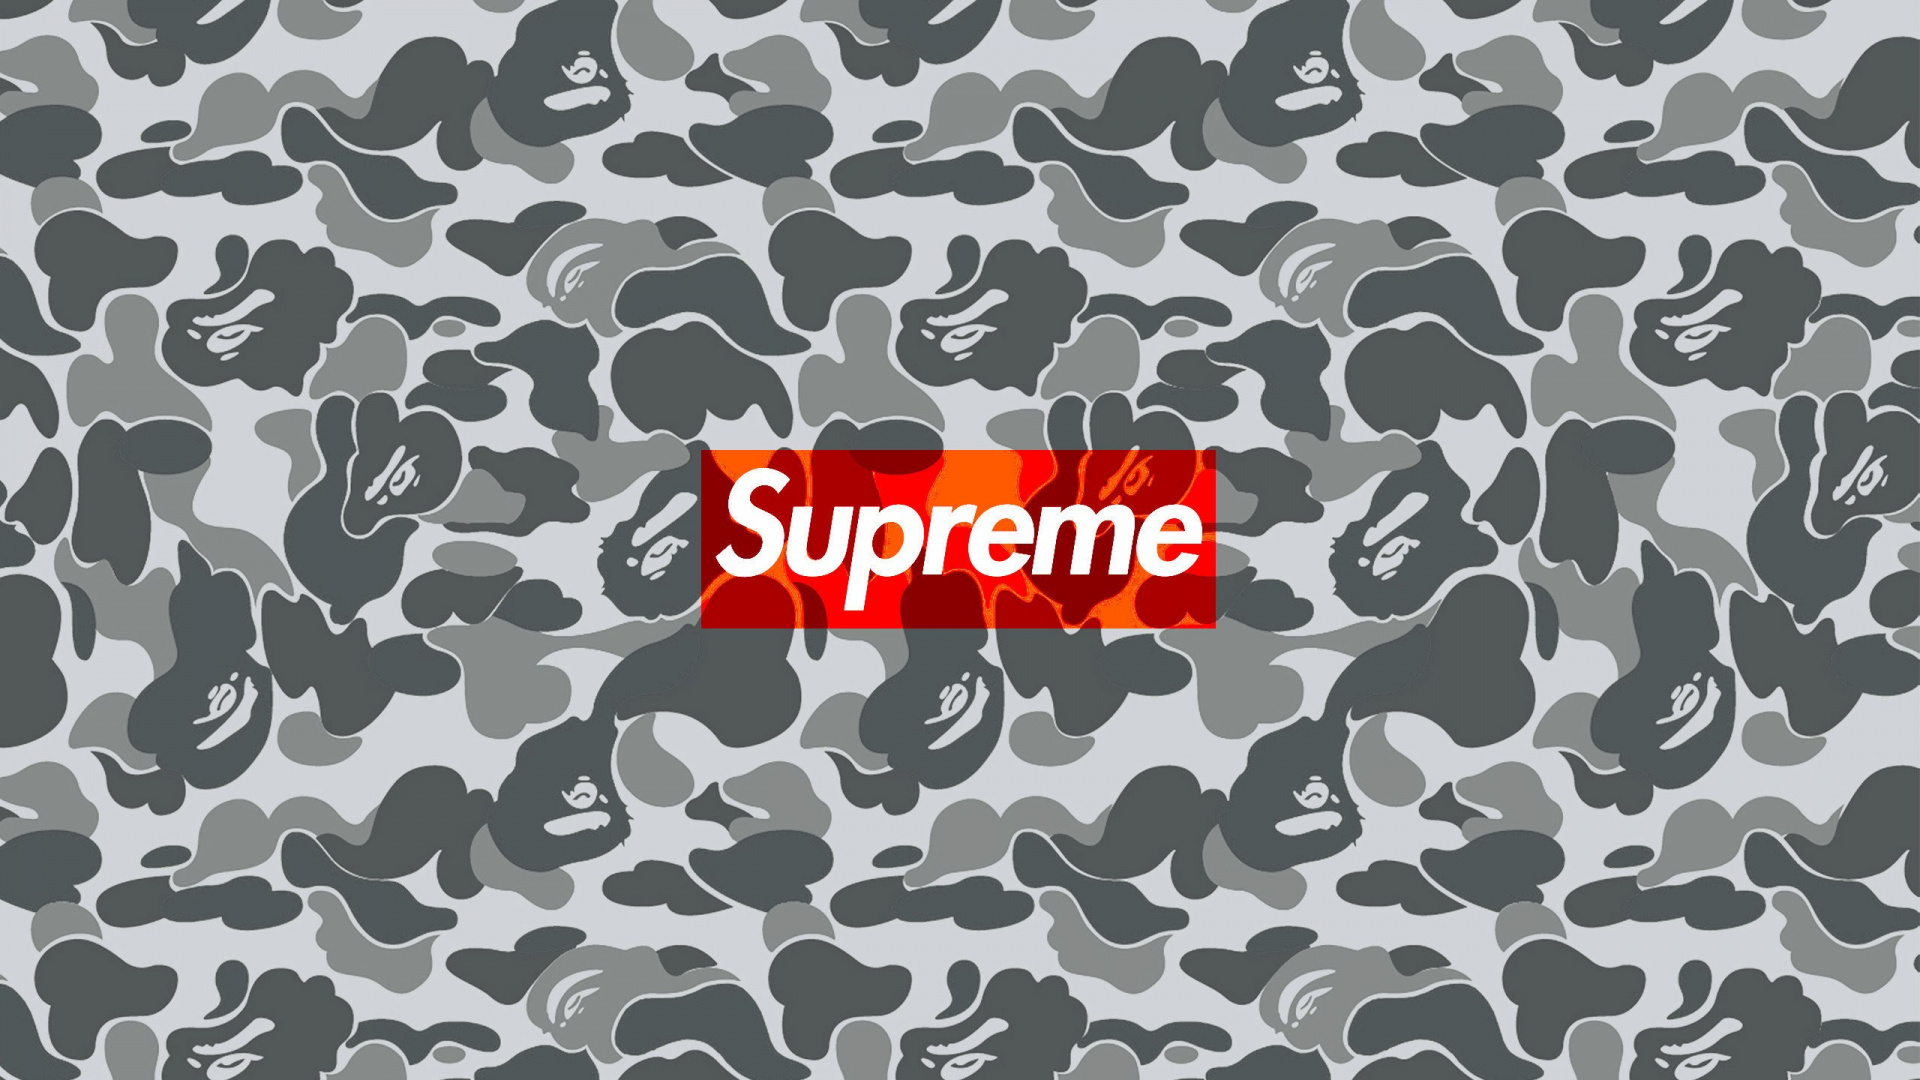 Suprême, Camouflage Militaire, Camouflage, Conception, Louis Vuitton. Wallpaper in 1920x1080 Resolution